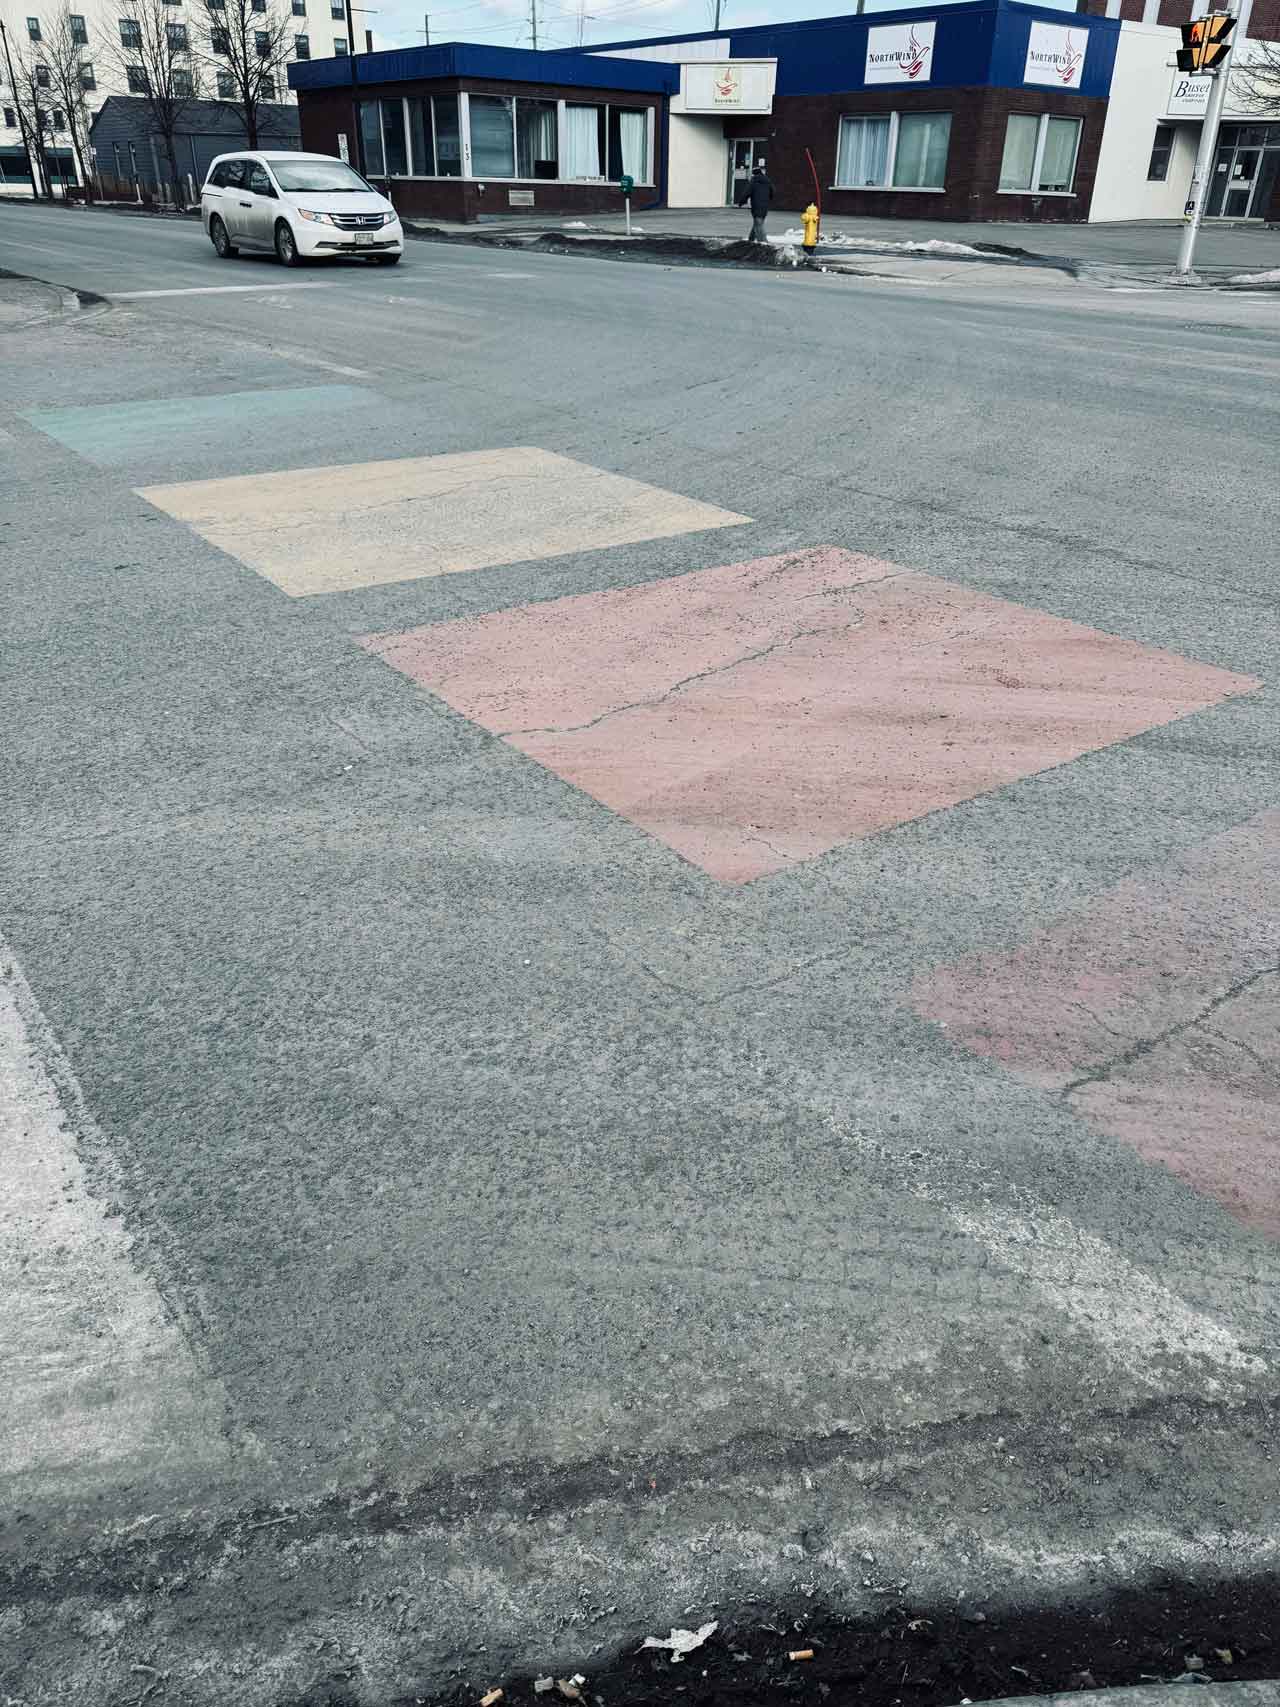 The Pride Crosswalk at Donald and May Street South - A worn out spectacle of former vibrance